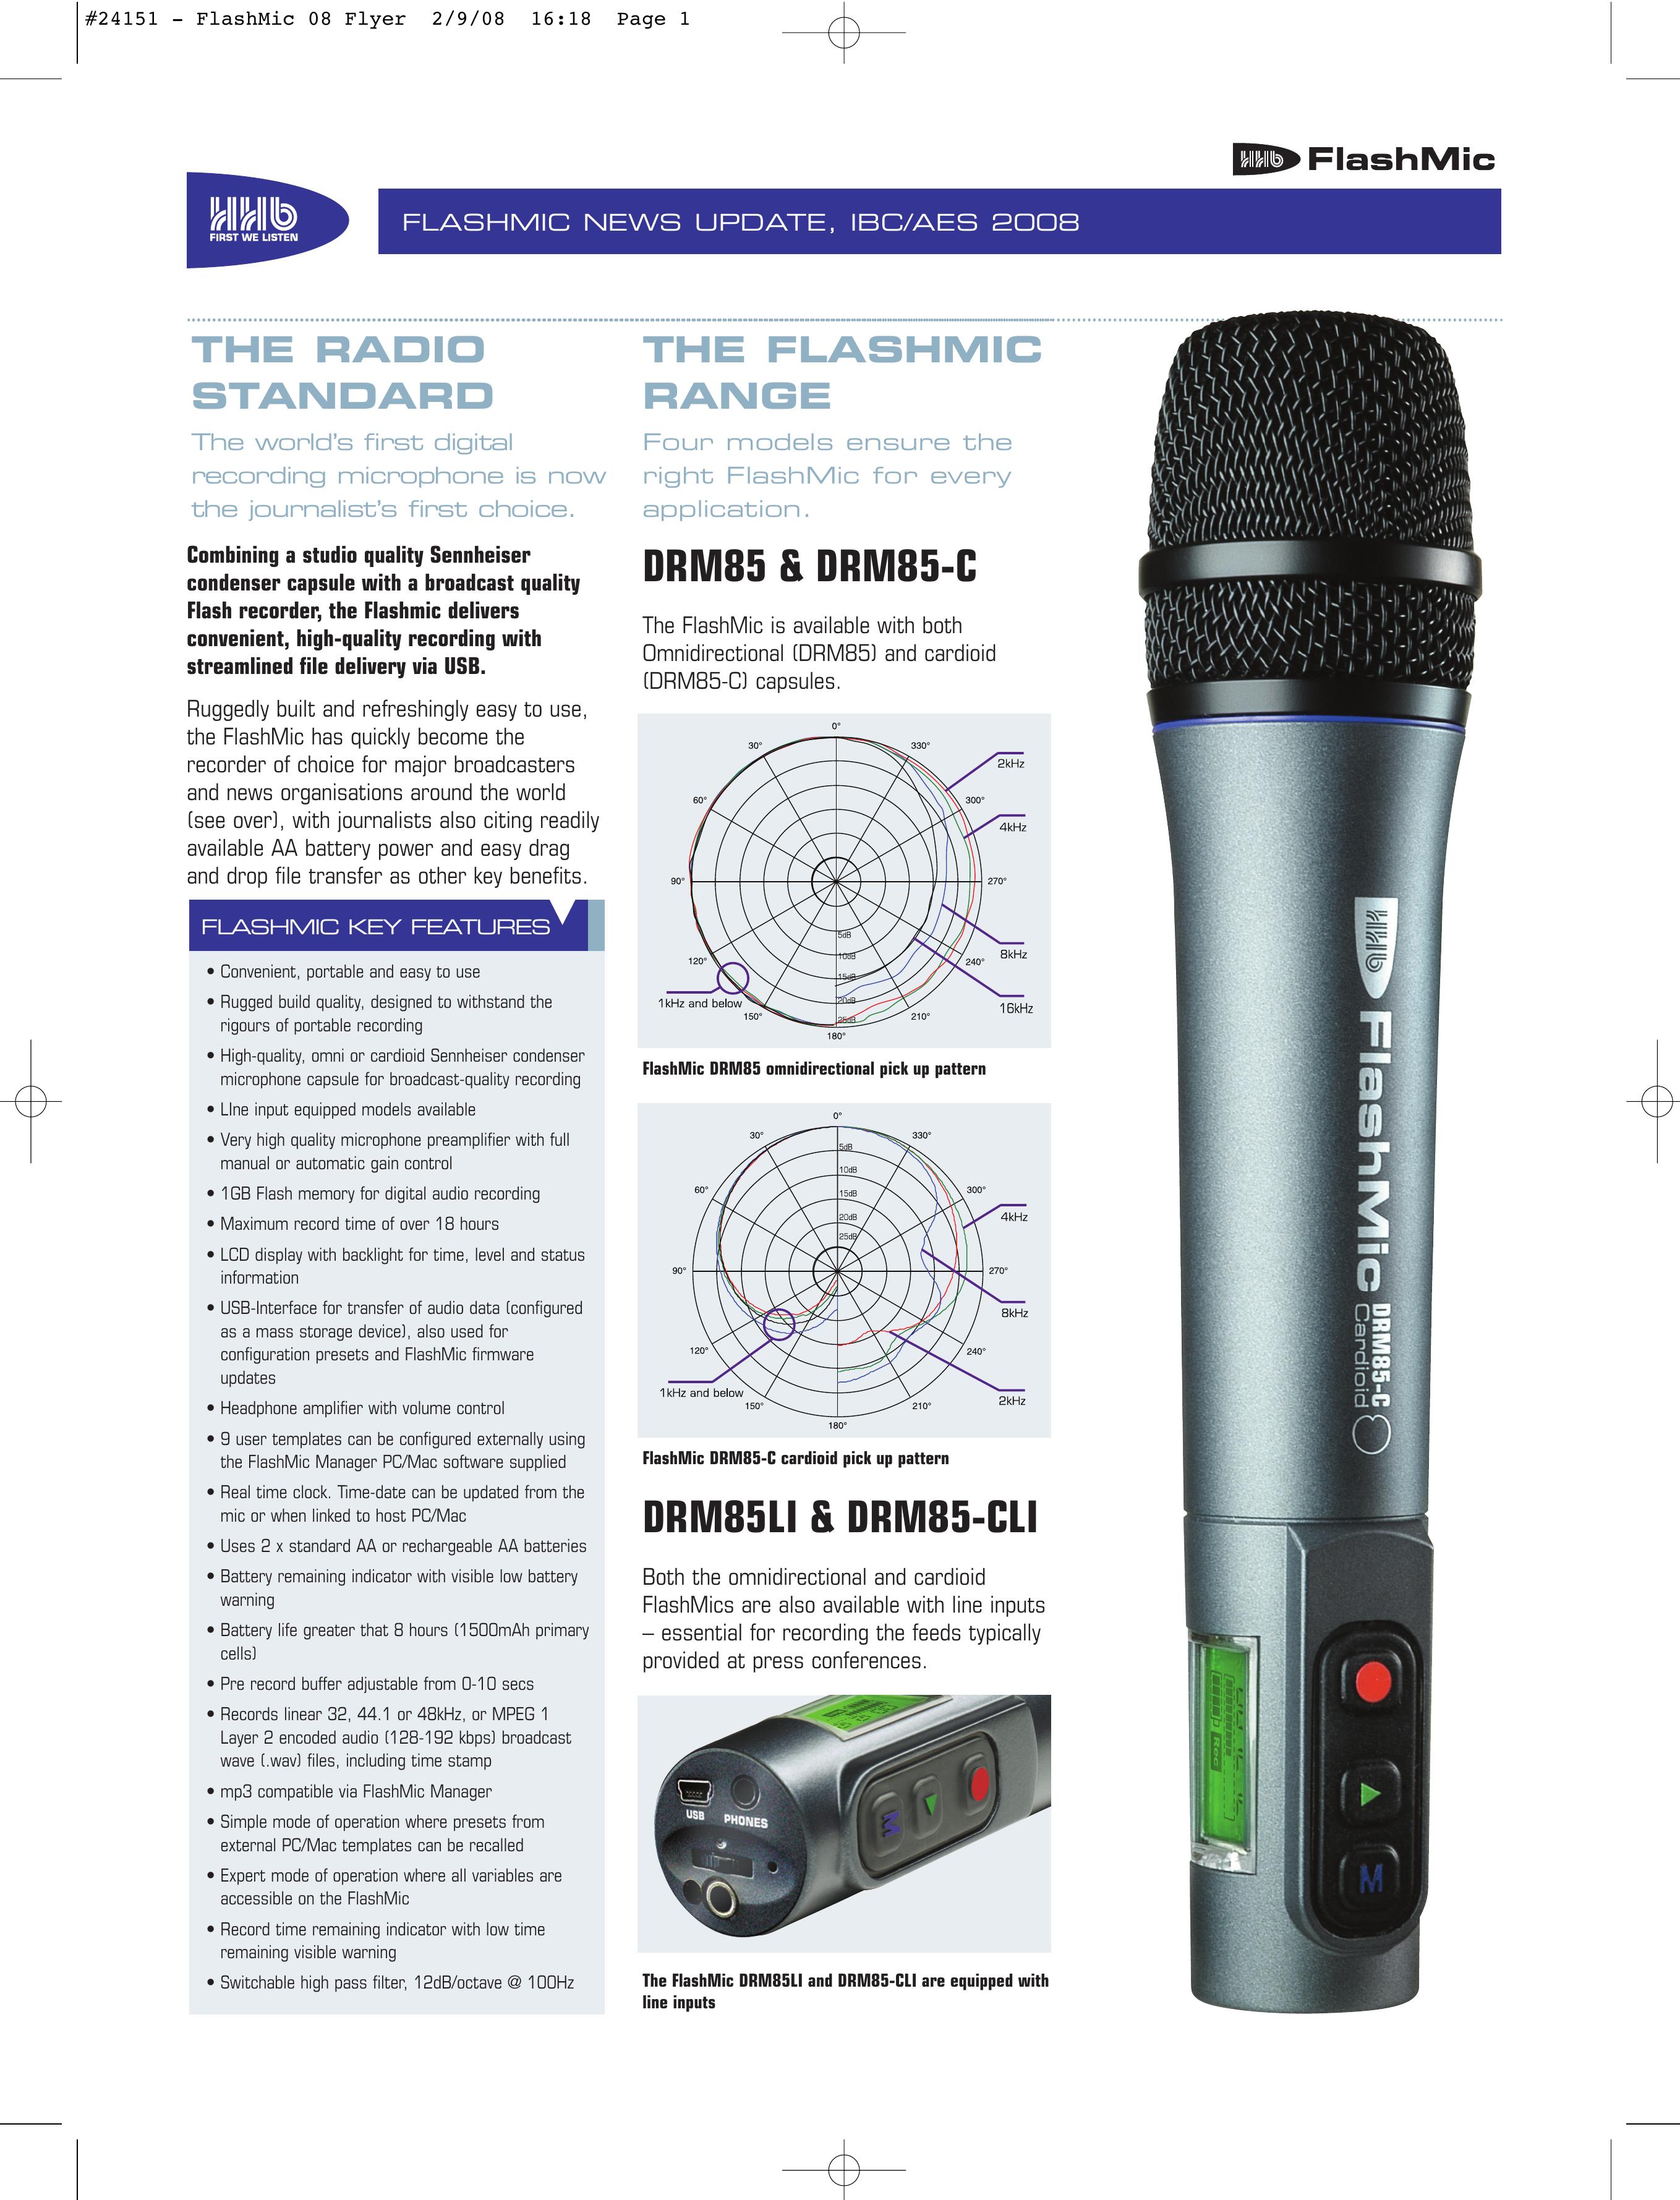 HHB comm DRM85-C Microphone User Manual